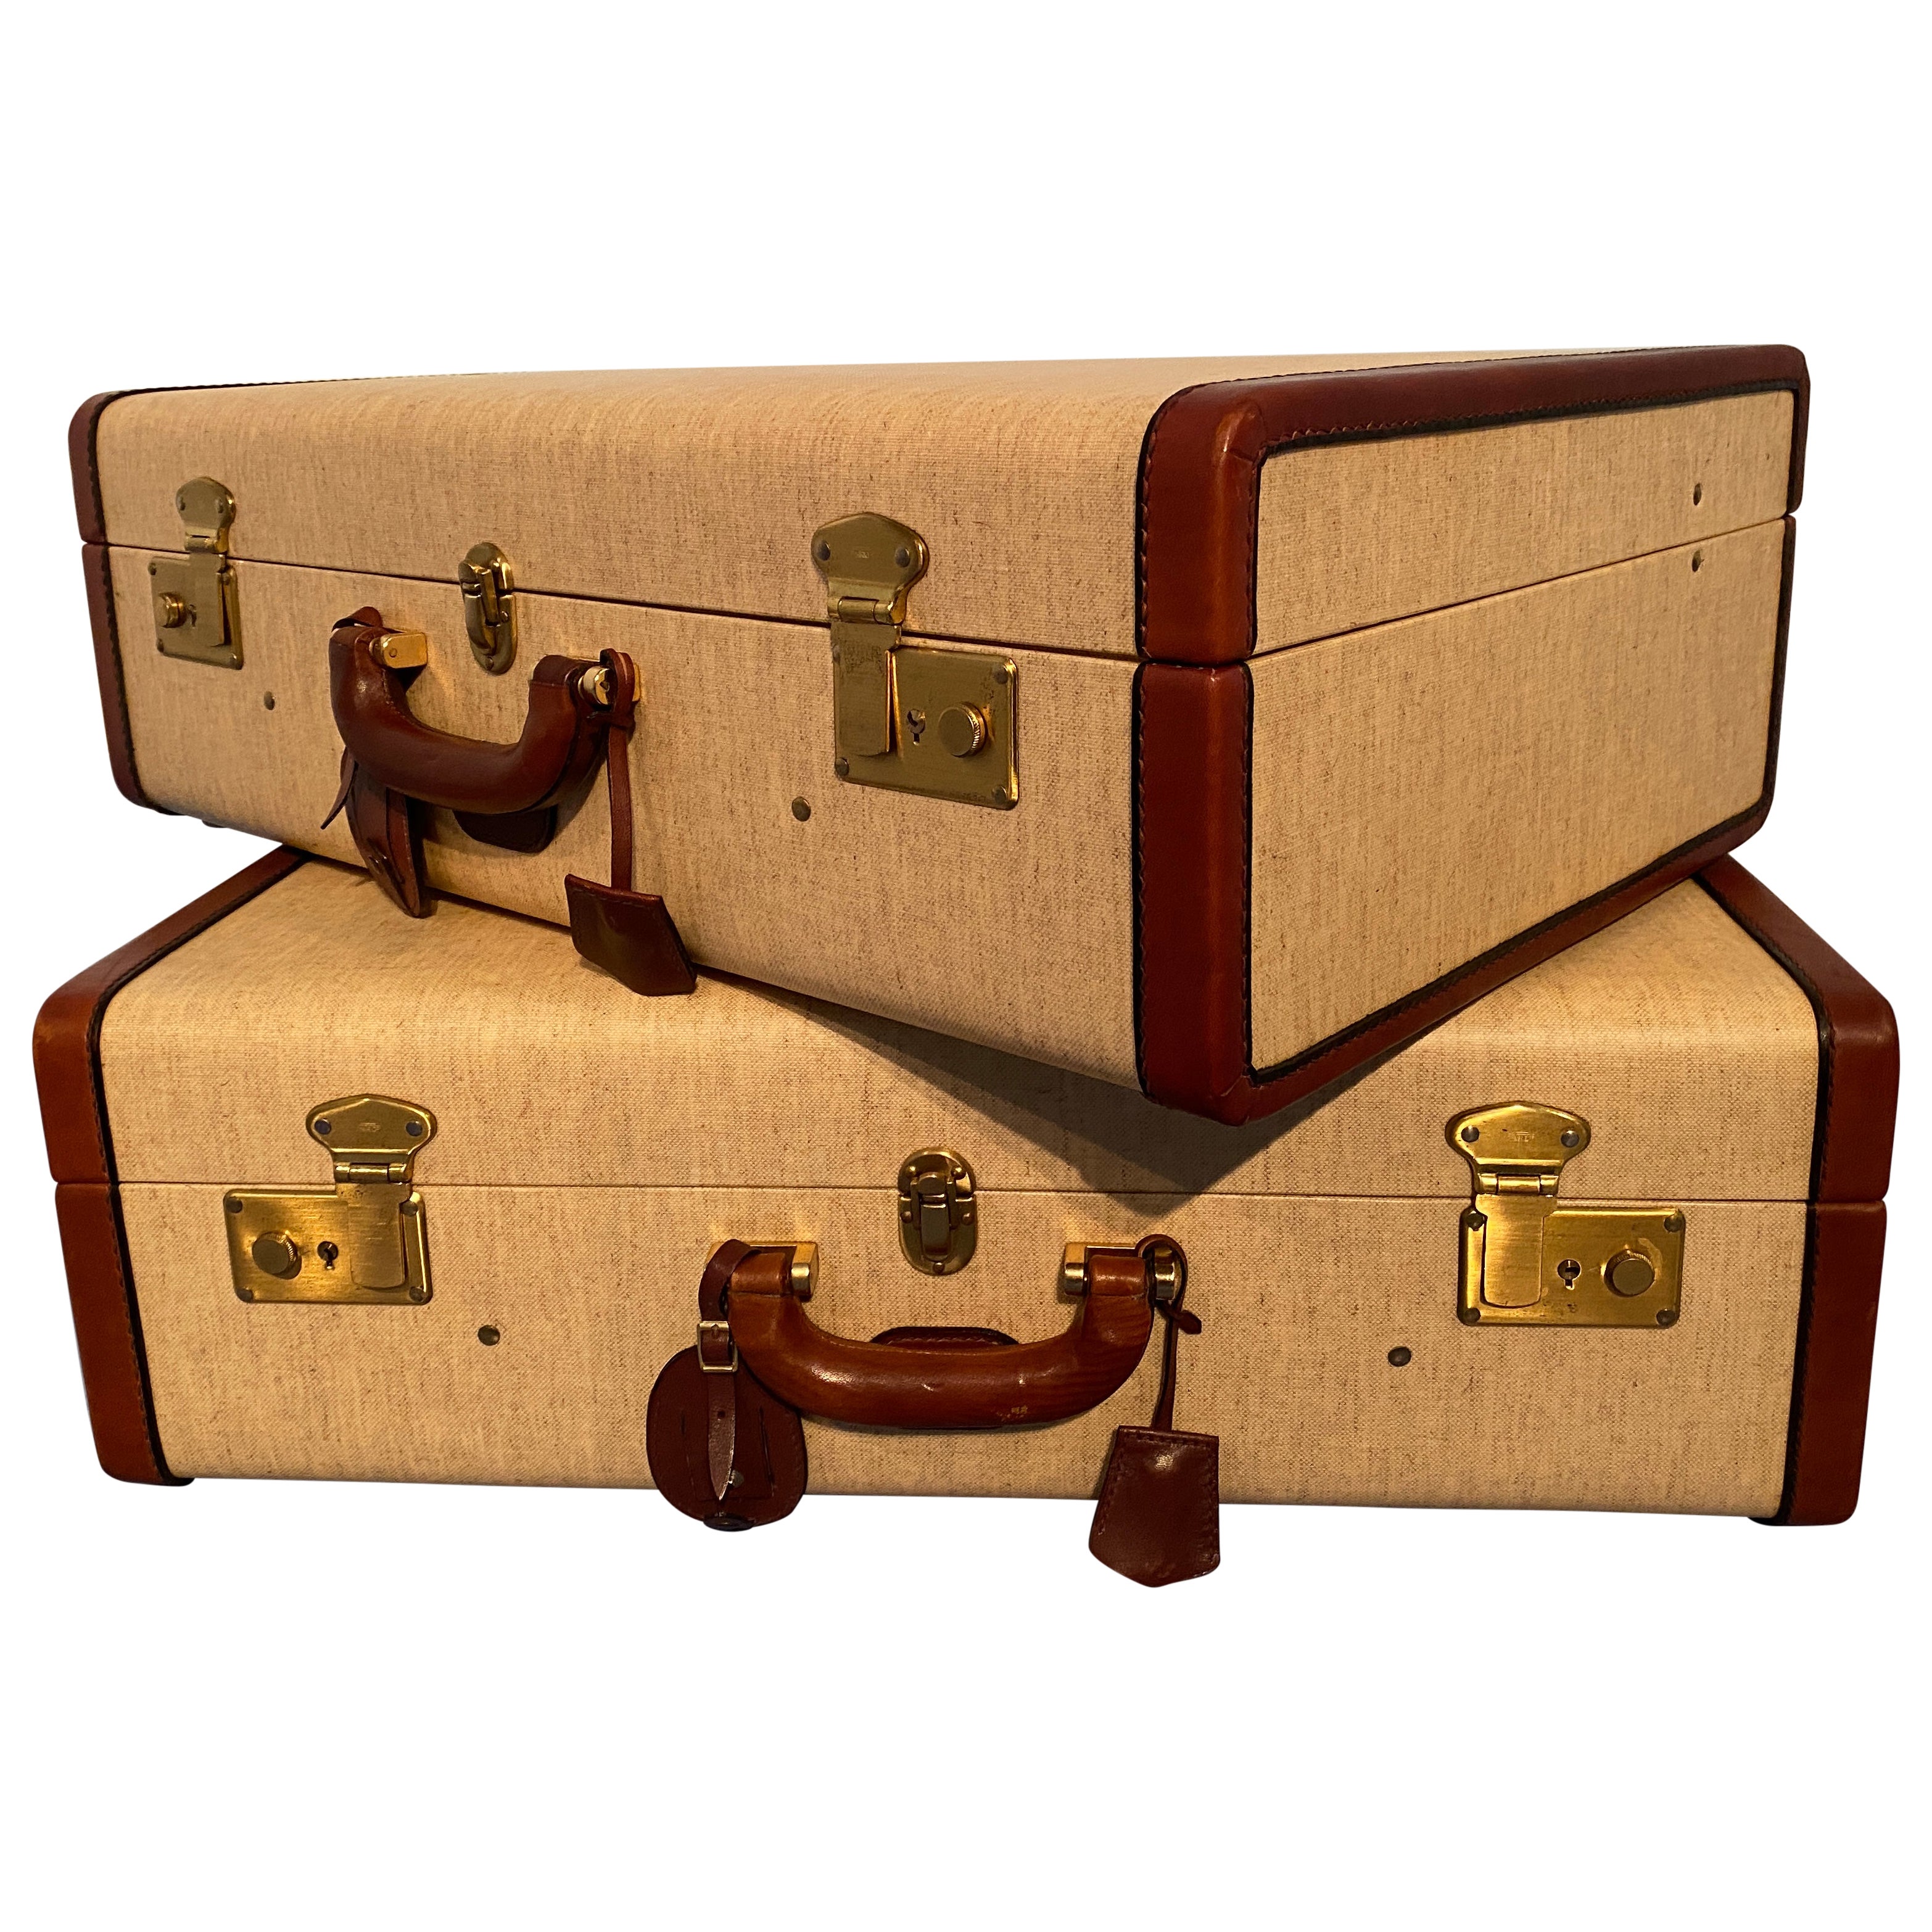 Italian Mid-Century Moder Luggages or Suitcases Mèlange Color, Set of Two, 1960 For Sale